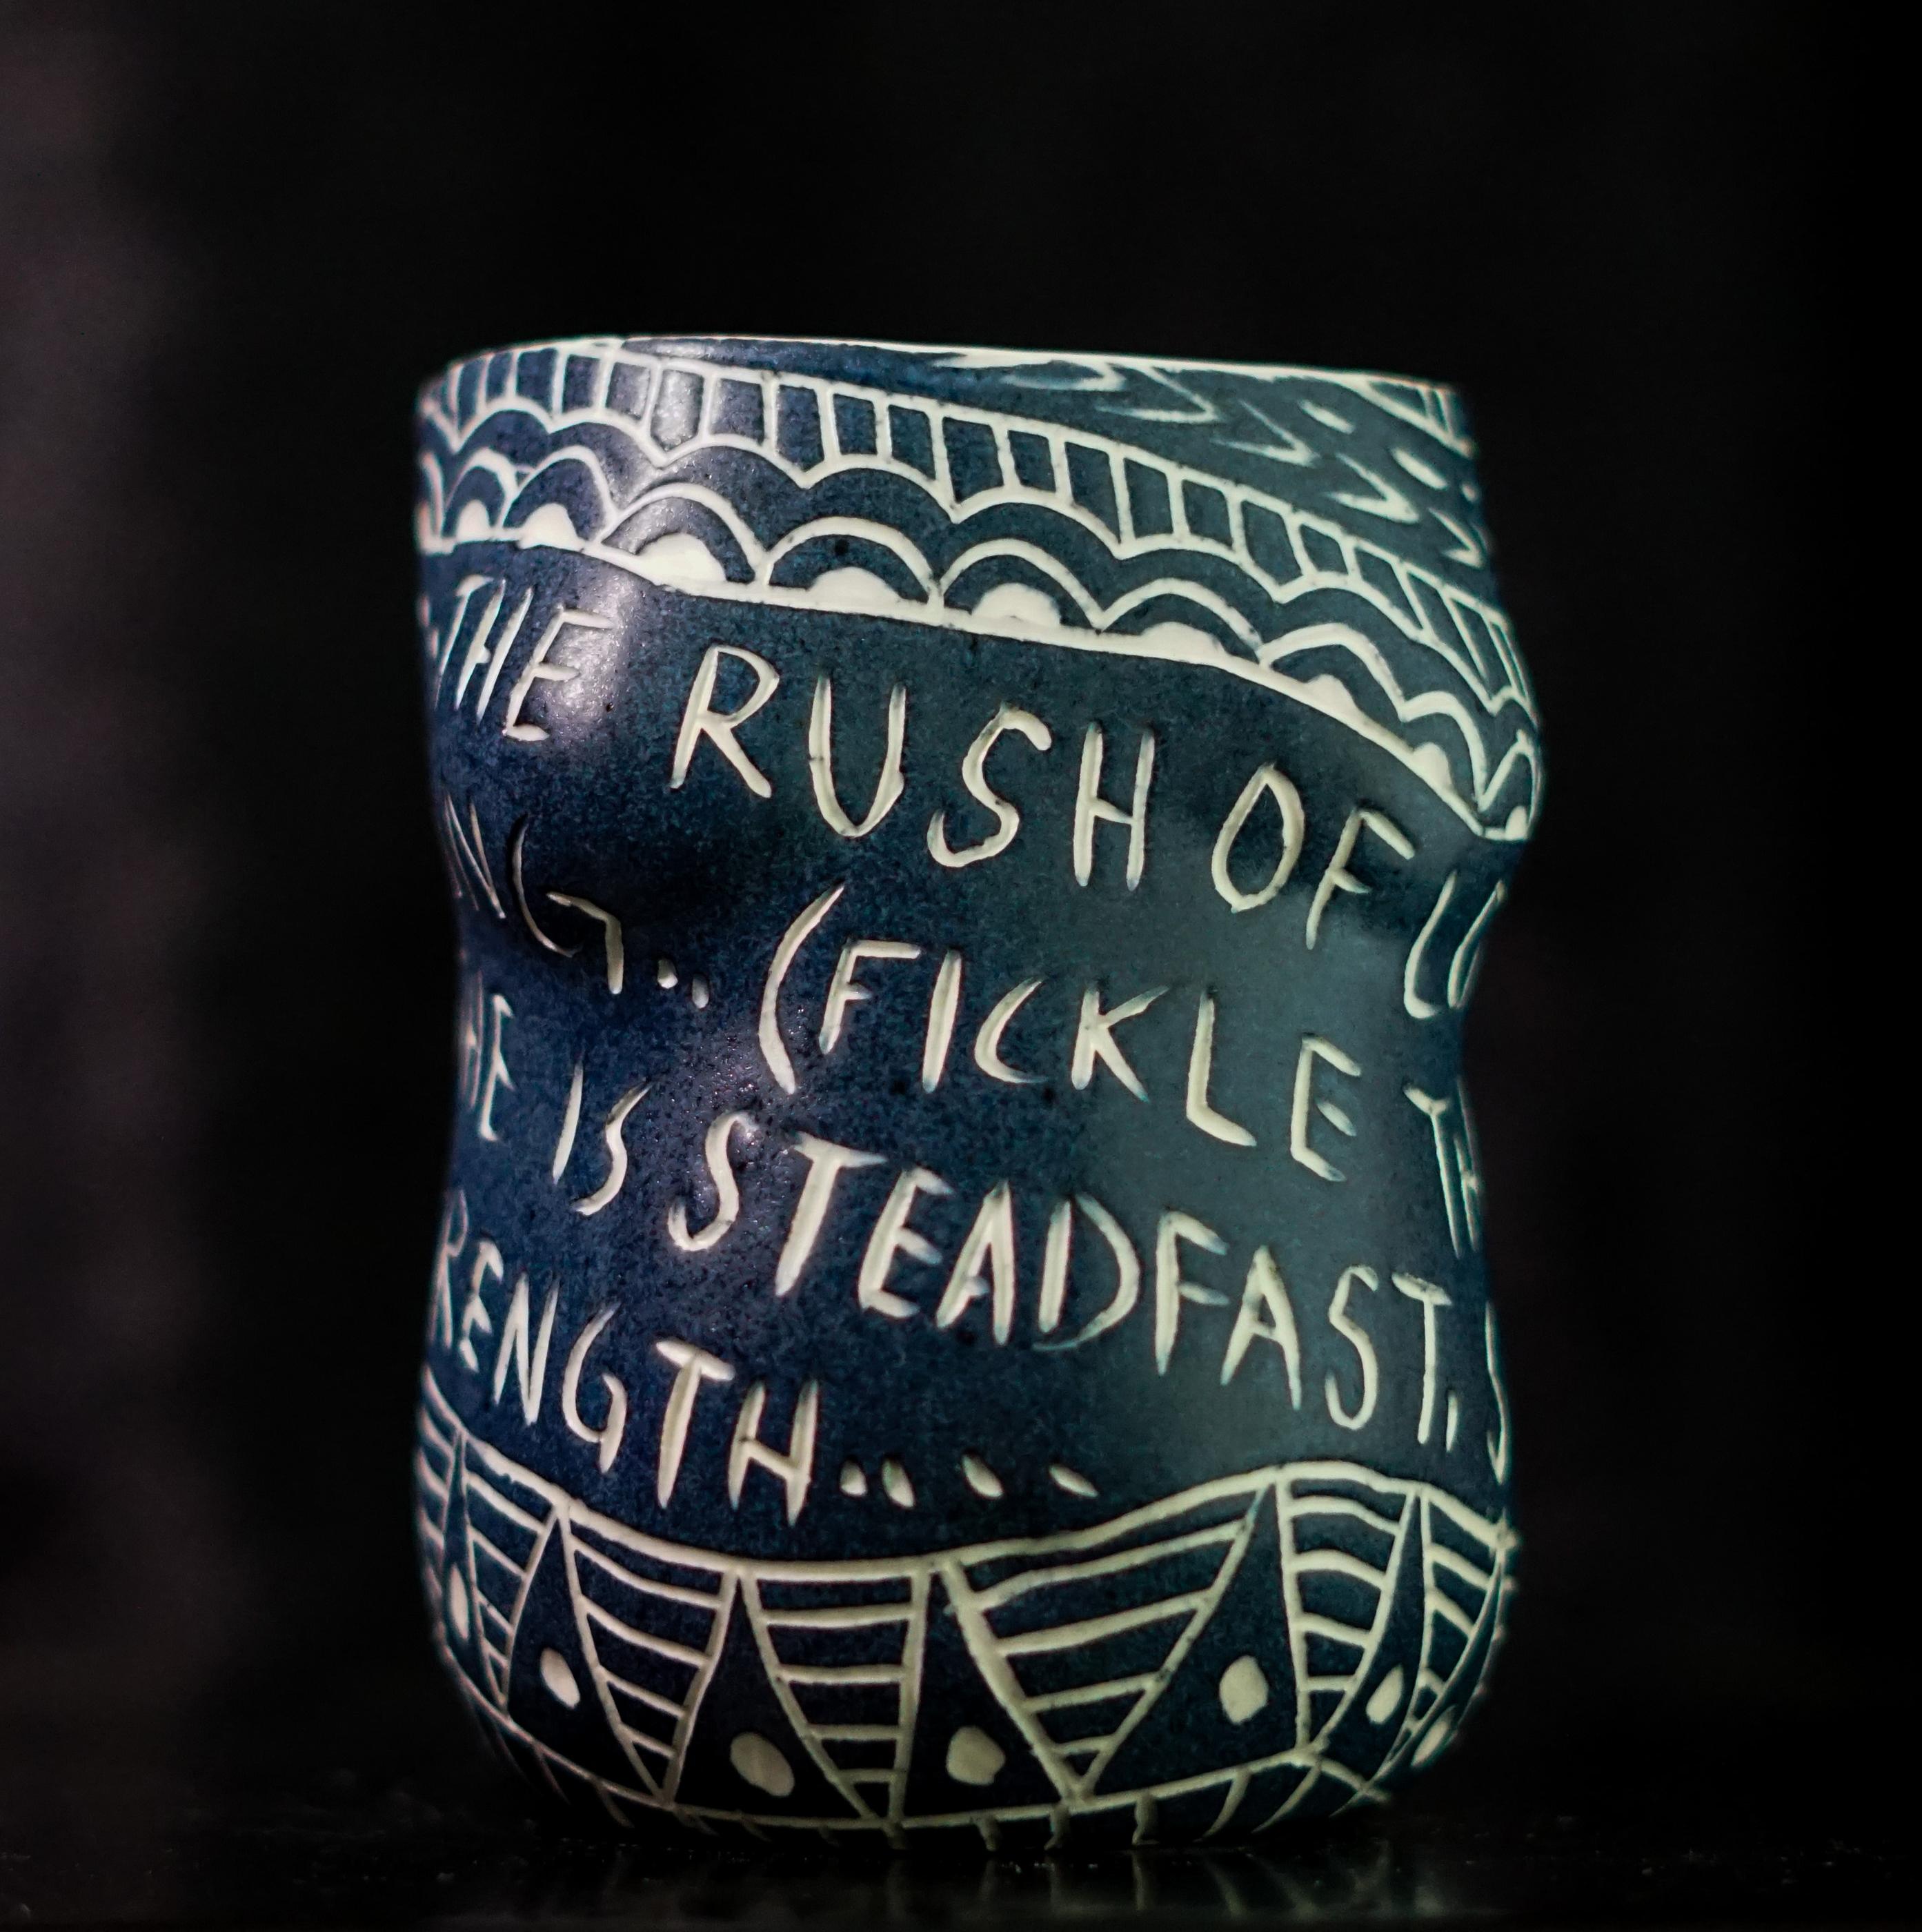 “The Rush of Love..” Porcelain cup with sgraffito detailing by the artist